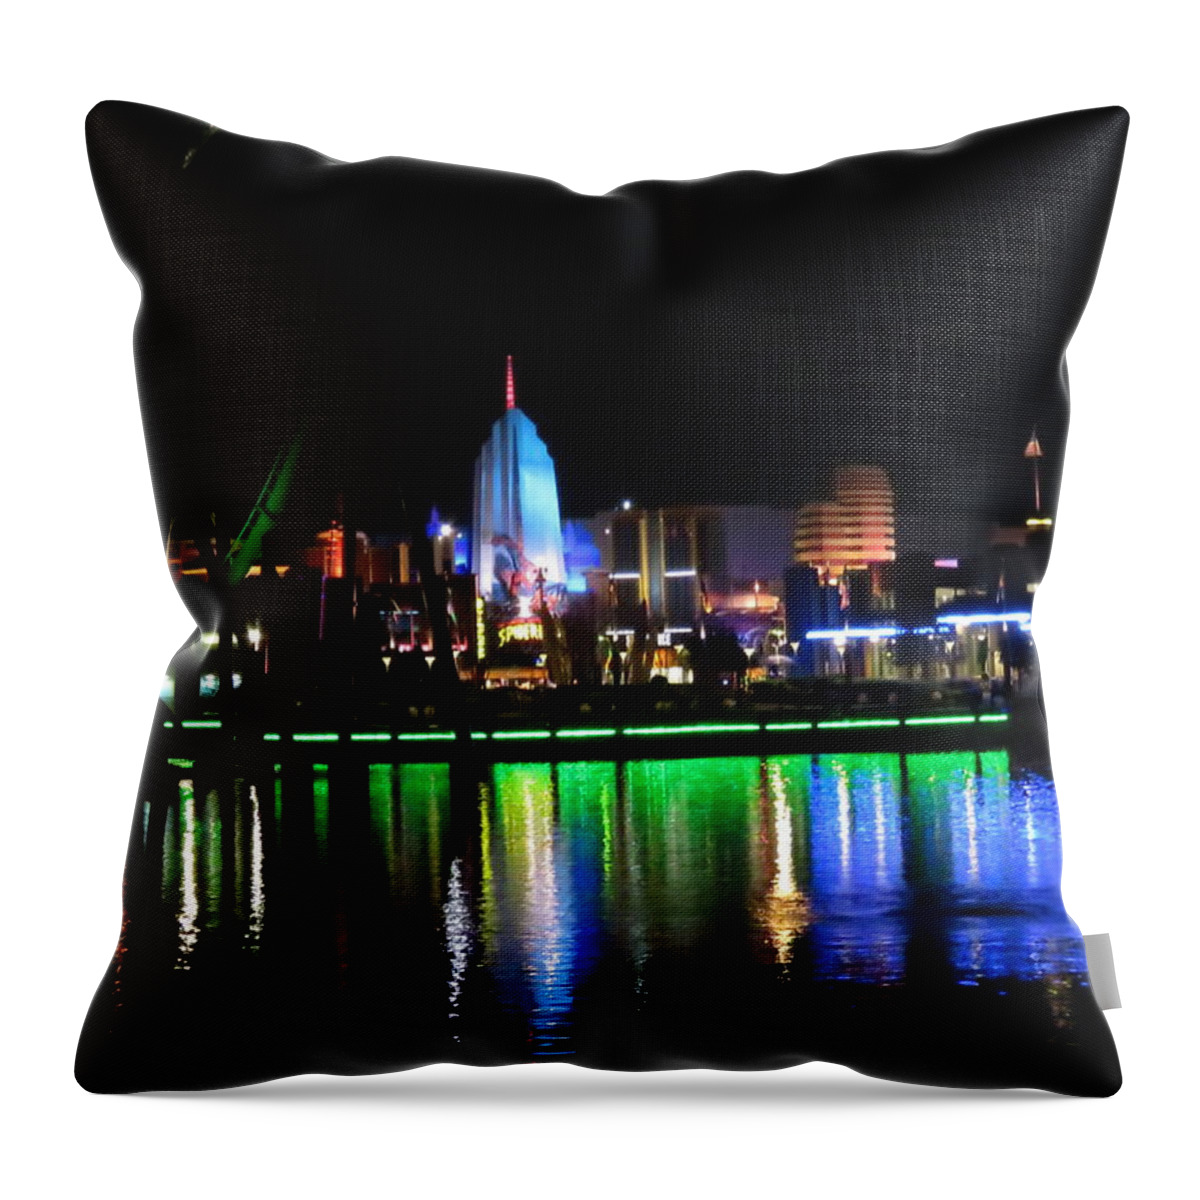 Kathy Long Throw Pillow featuring the photograph Light Reflections at Night by Kathy Long